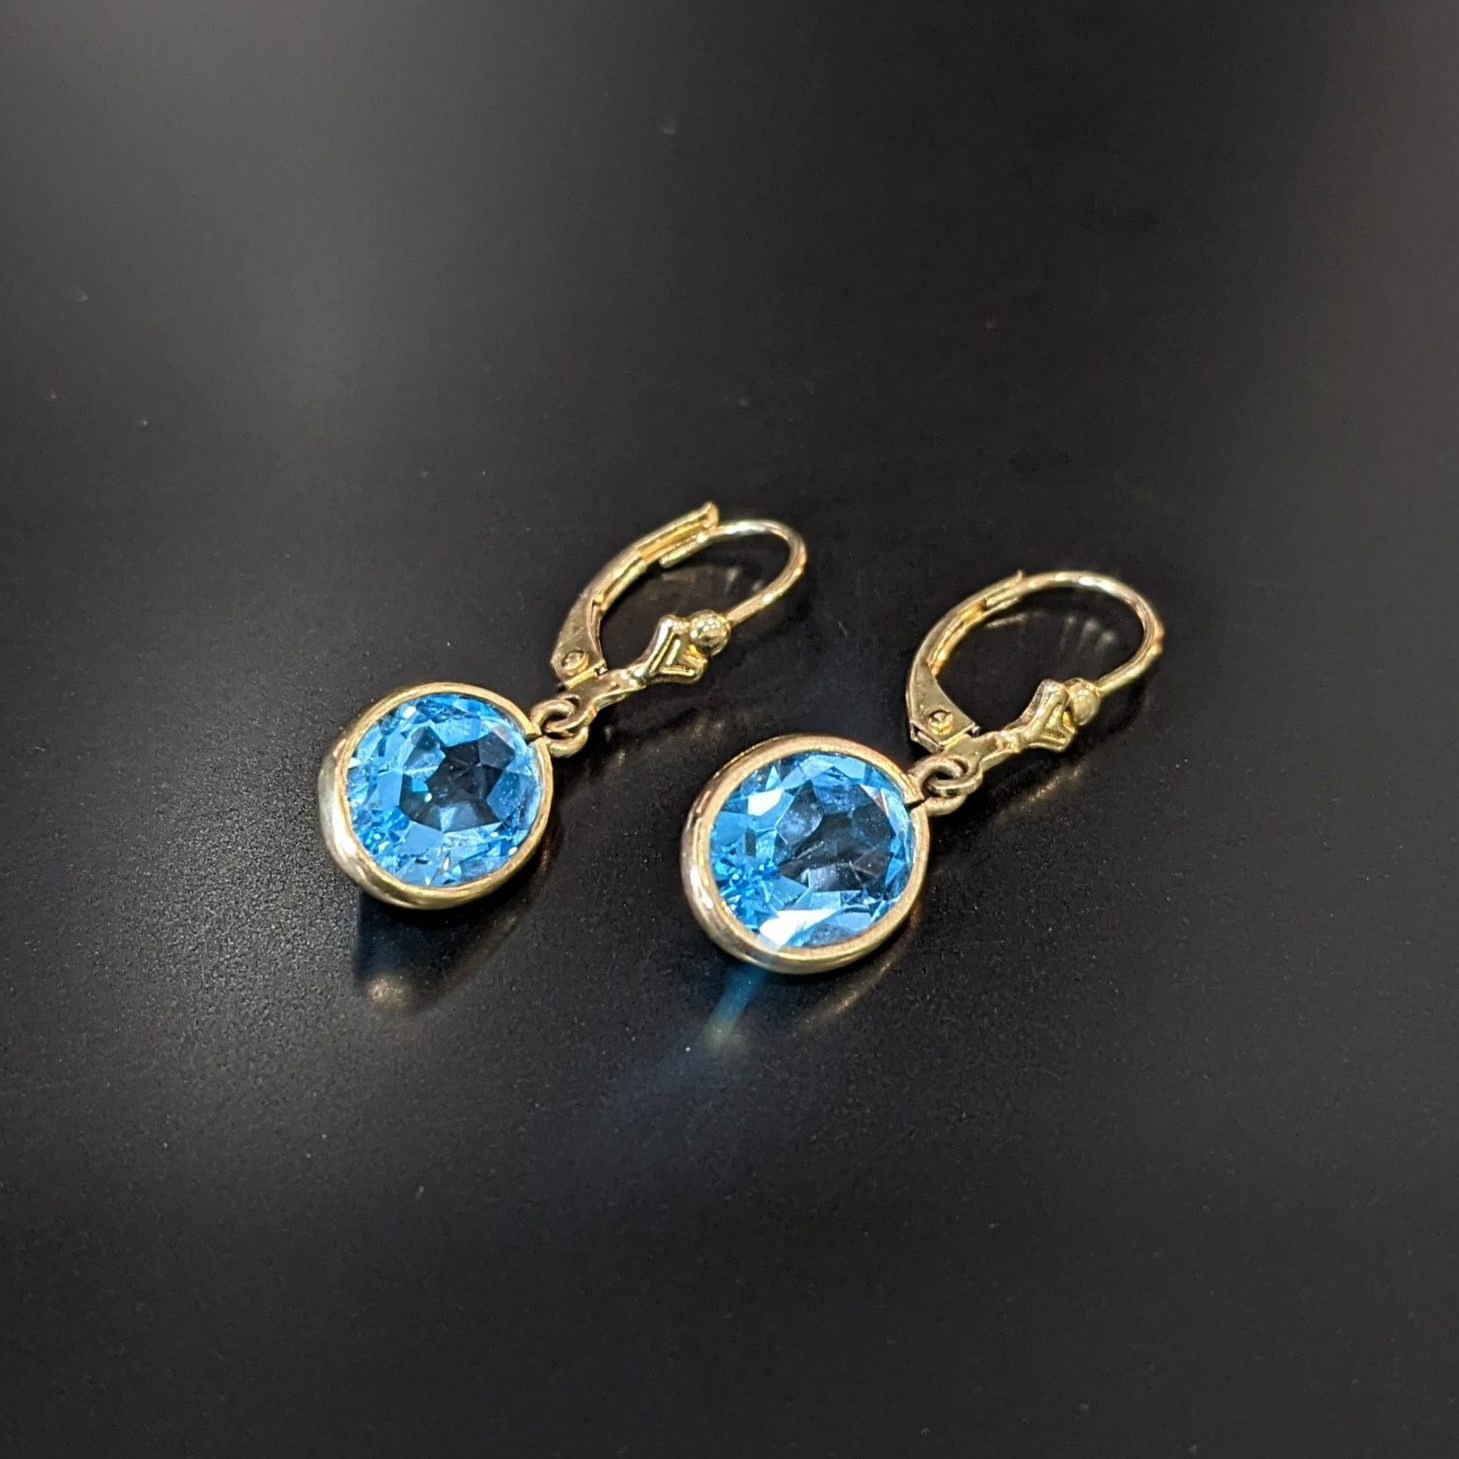 gemstone earrings for women featuring blue topaz and yellow gold handmade in melbourne